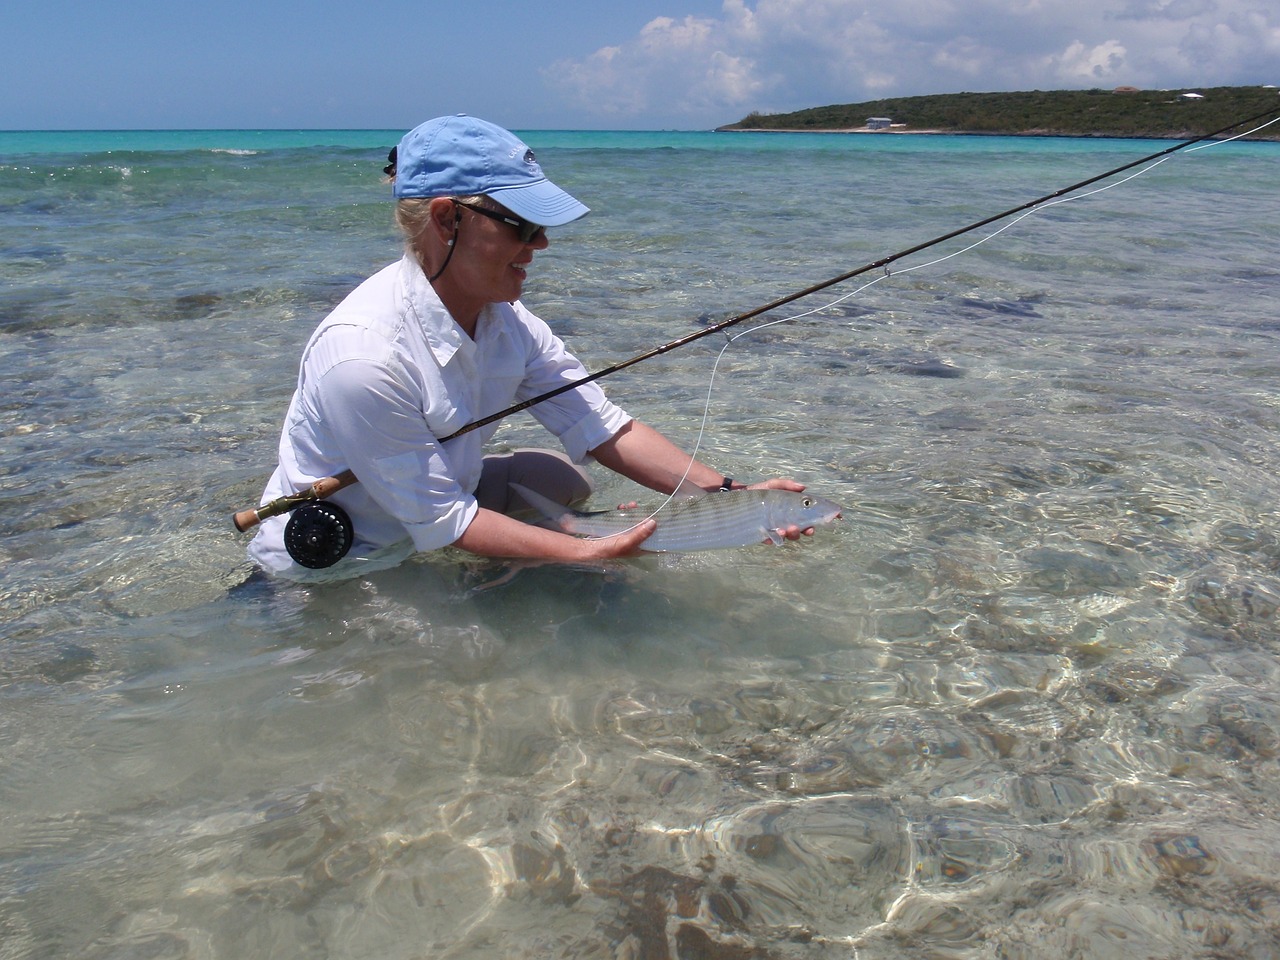 Where to Go for the Best Fly Fishing in The Bahamas?